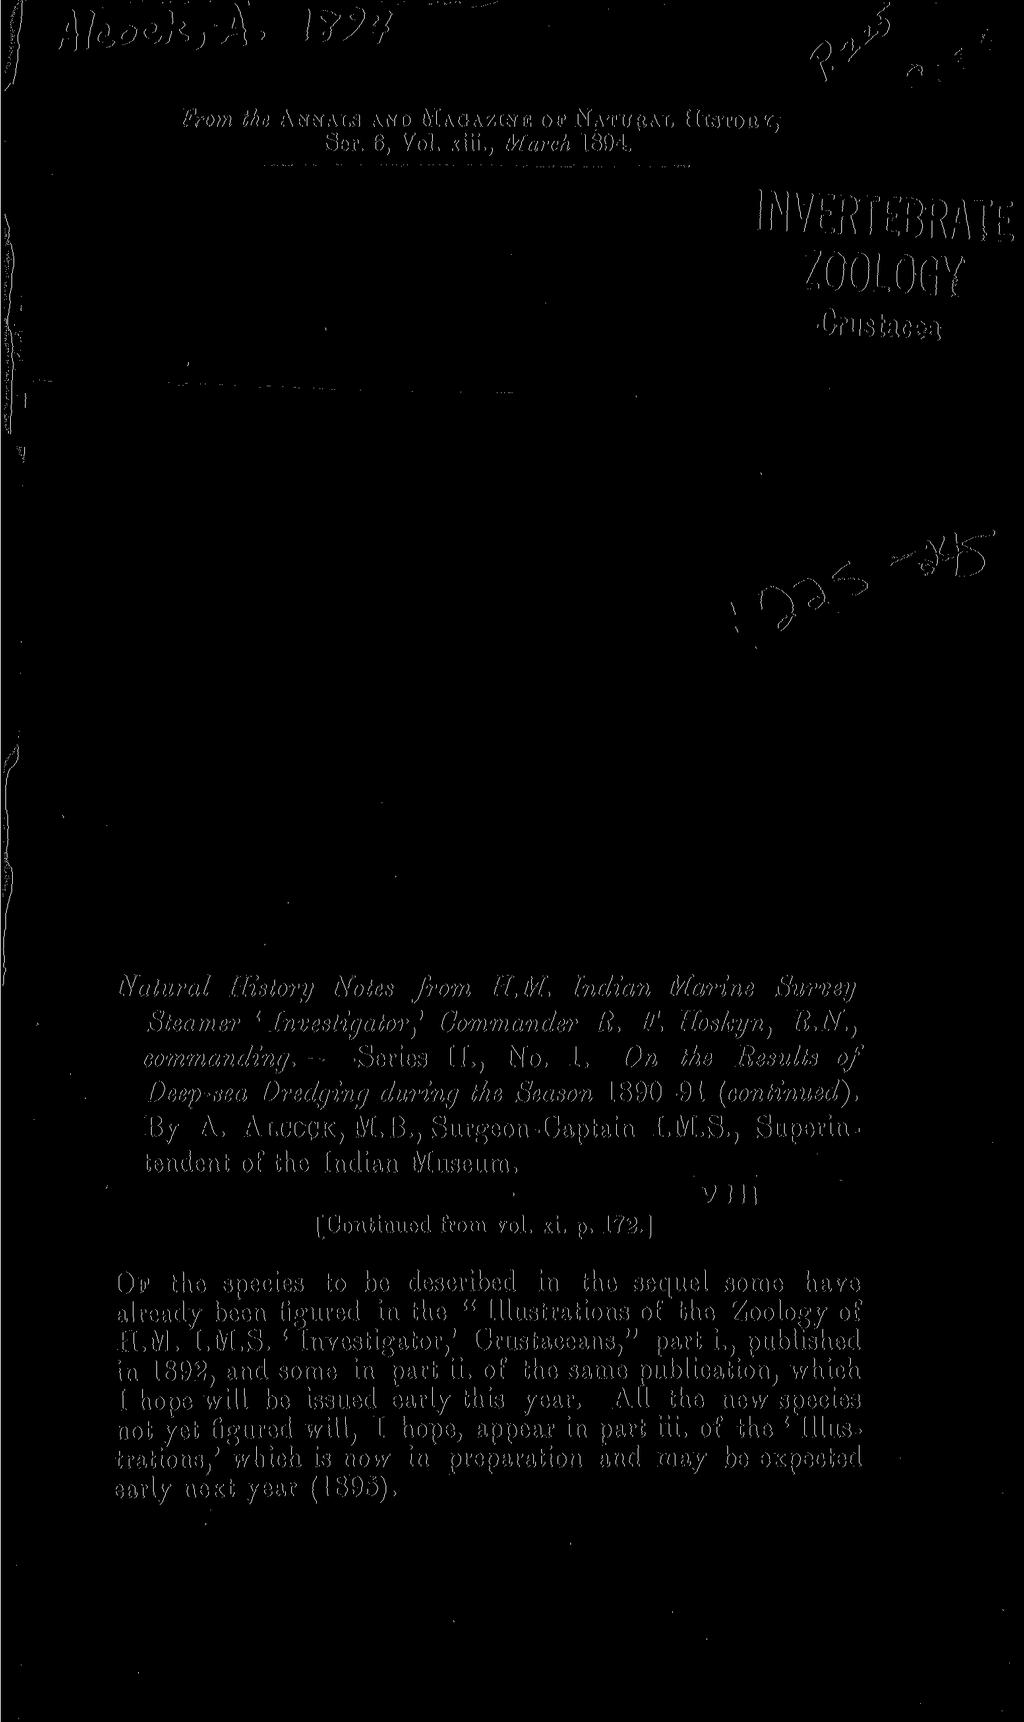 Alc.oc.k-, A' W t From the ANNALS AND MAGAZINE OP NATURAL HISTORY, Ser. 6, Vol. xiii., March 1894. INVERTEBRATE ZOOLOGY Crustacea \ cr 2 6 Natural History Notes from H.M. Indian Marine Survey Steamer 1 InvestigatorCommander R.